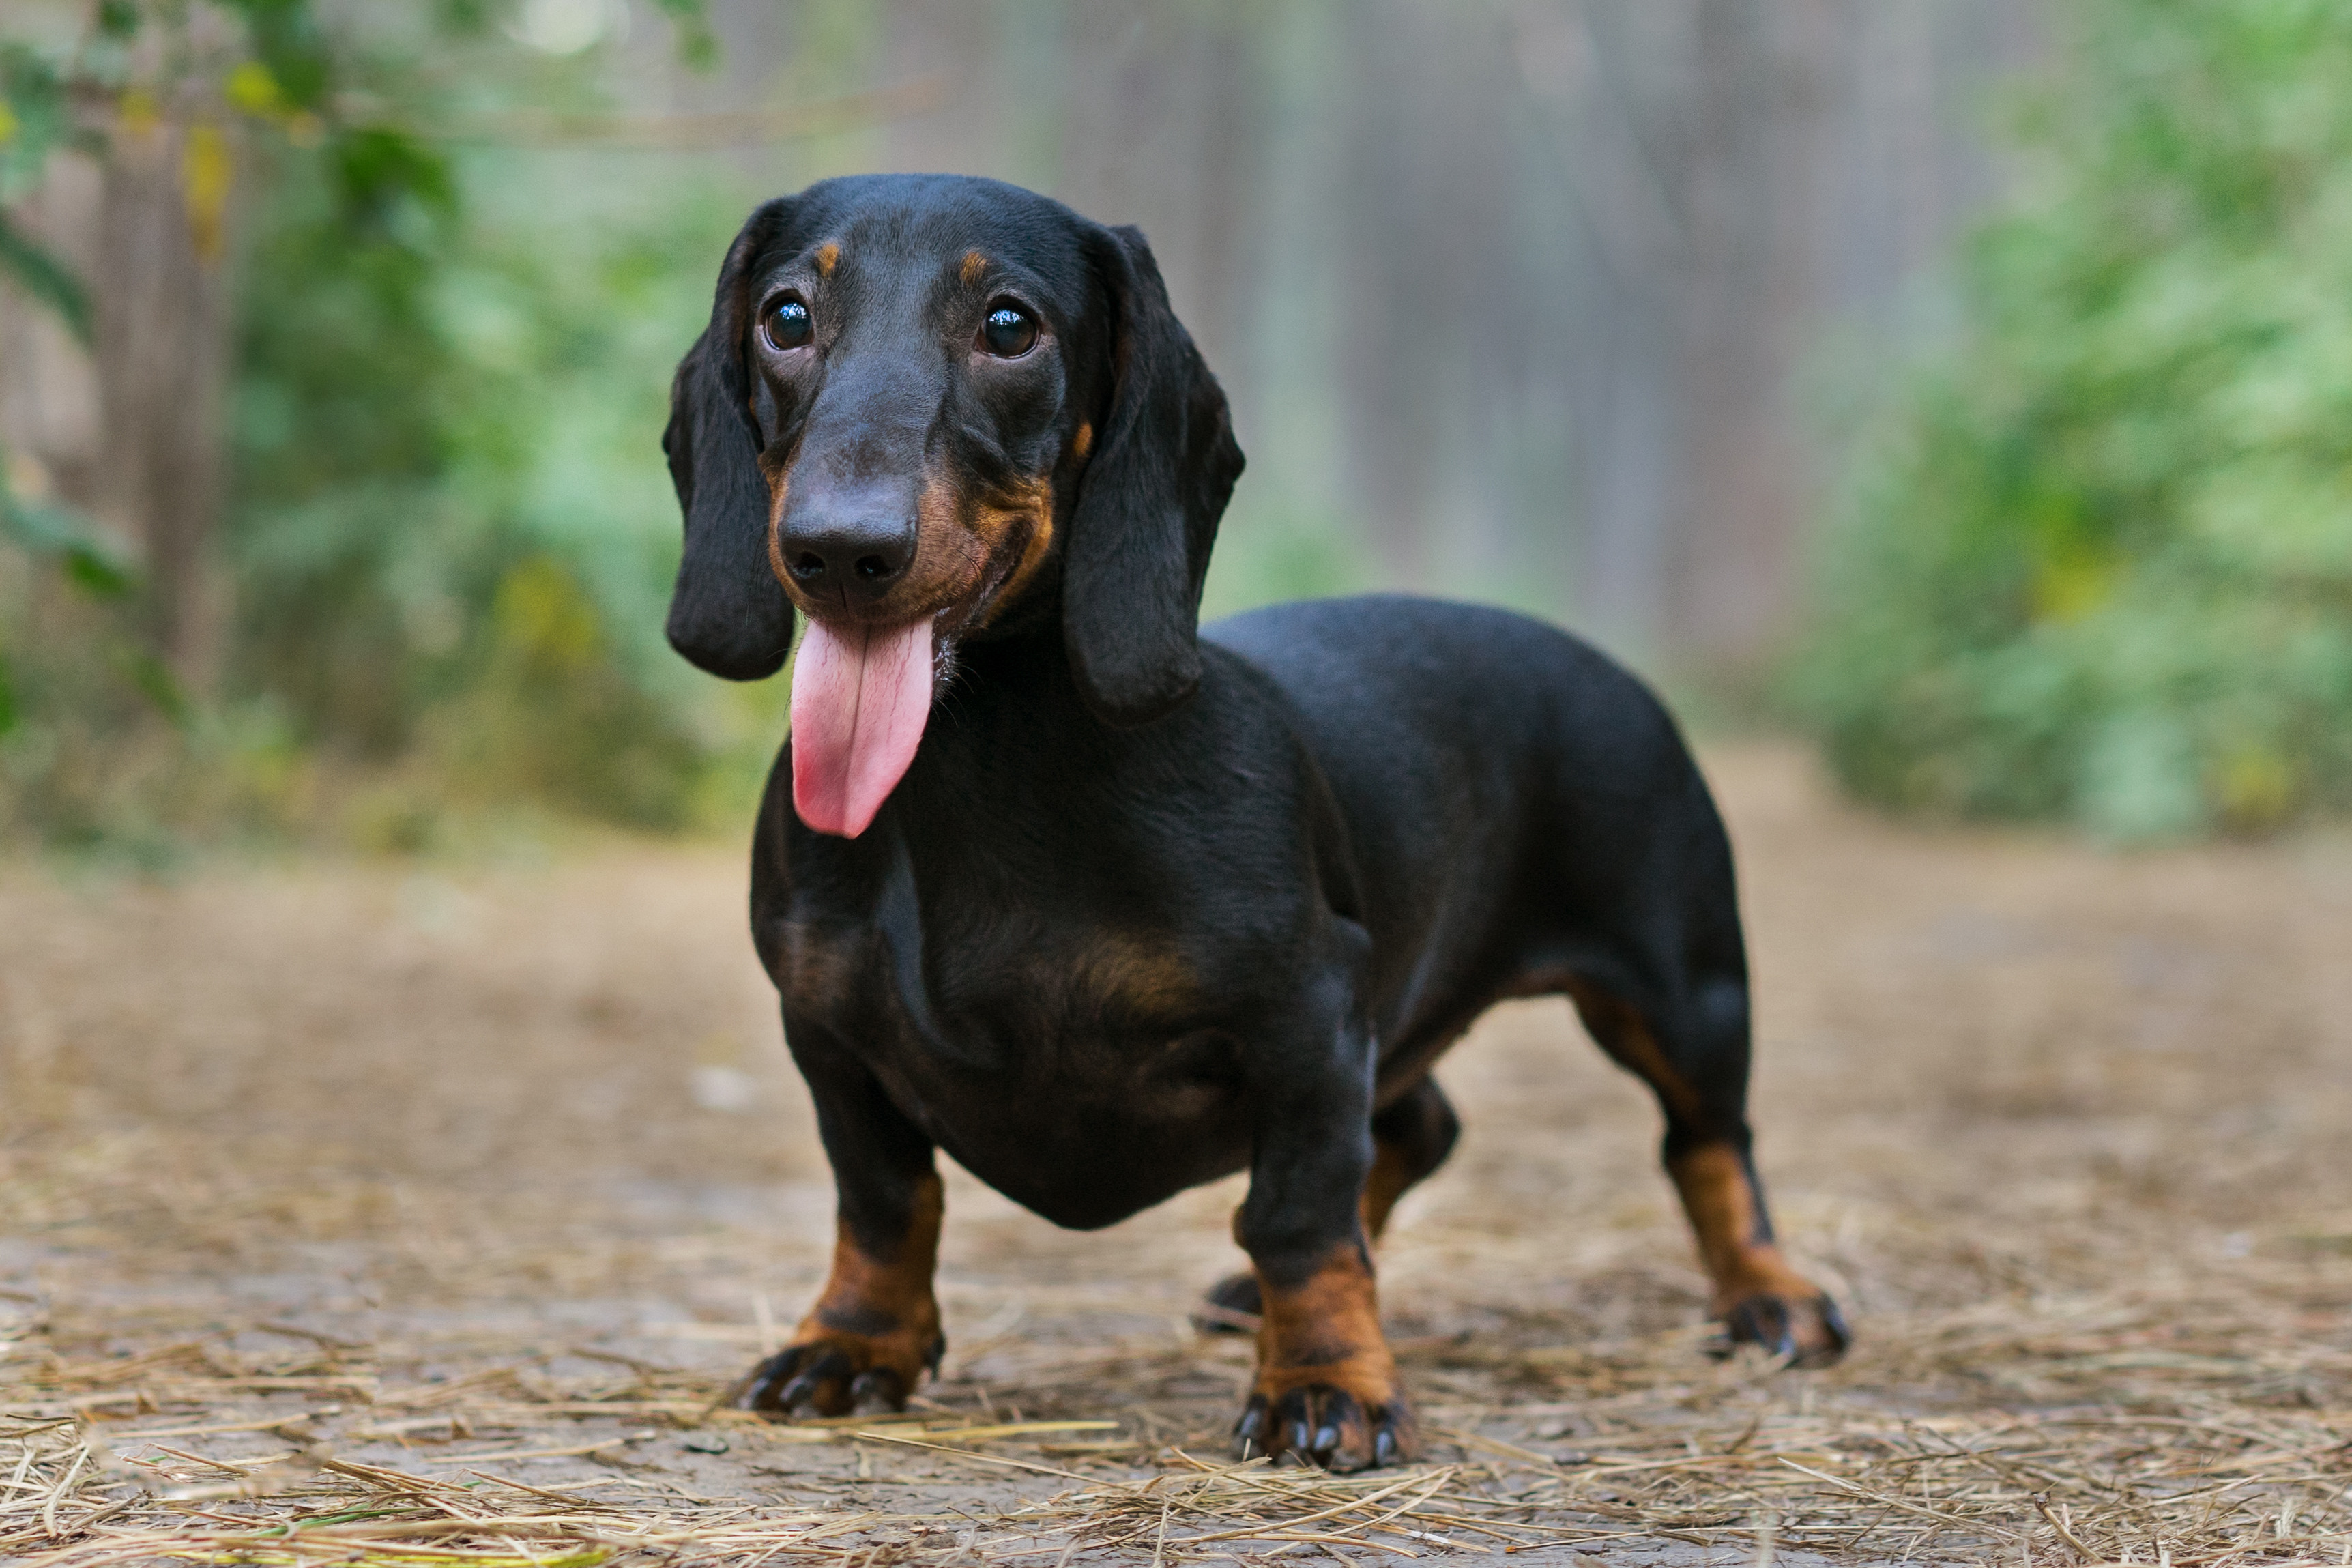 Lovely portrait of a dog (puppy) breed dachshund black tan, in the green forest smiling with tongue